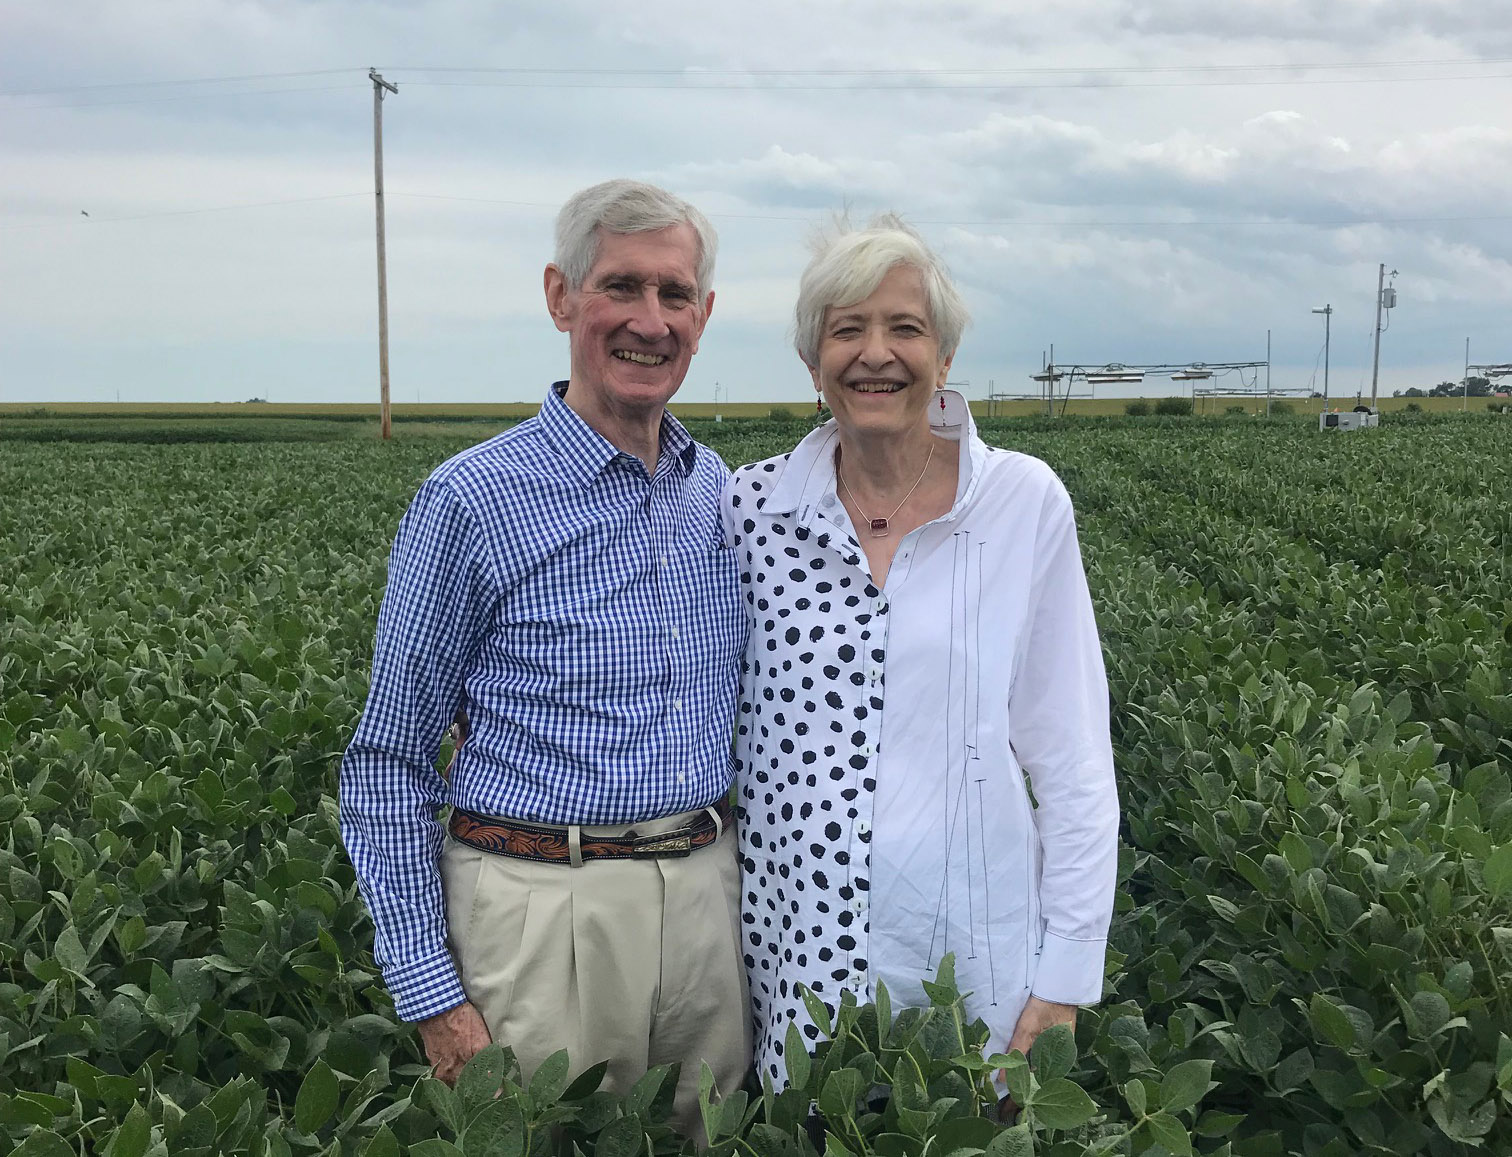 Robert and Kim Benziger at SoyFACE (Soybean Free Air Concentration Enrichment) during a 2019 tour of IGB research projects.